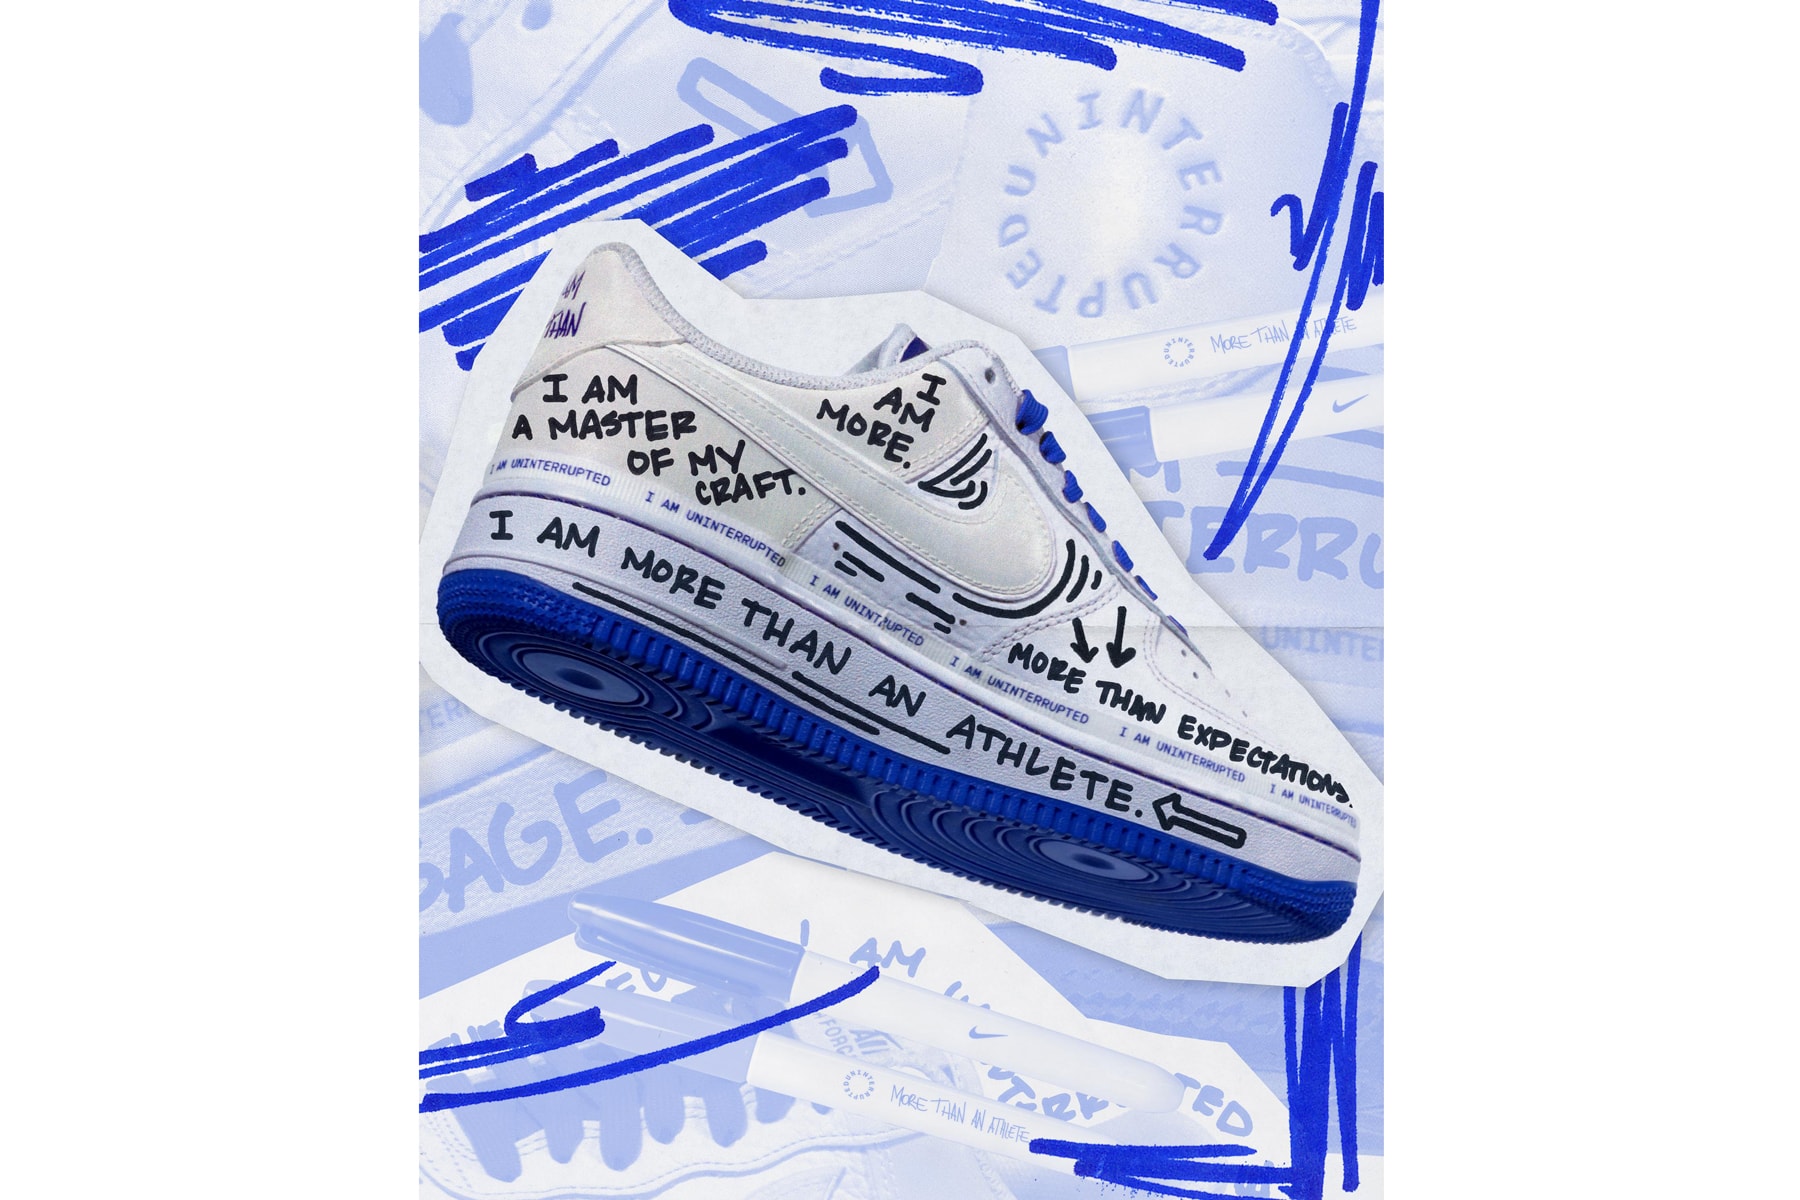 Uninterrupted Launches Nike Air Force 1 & E-Commerce Store apparel collection Maverick Carter collaborations lebron james more than an athlete